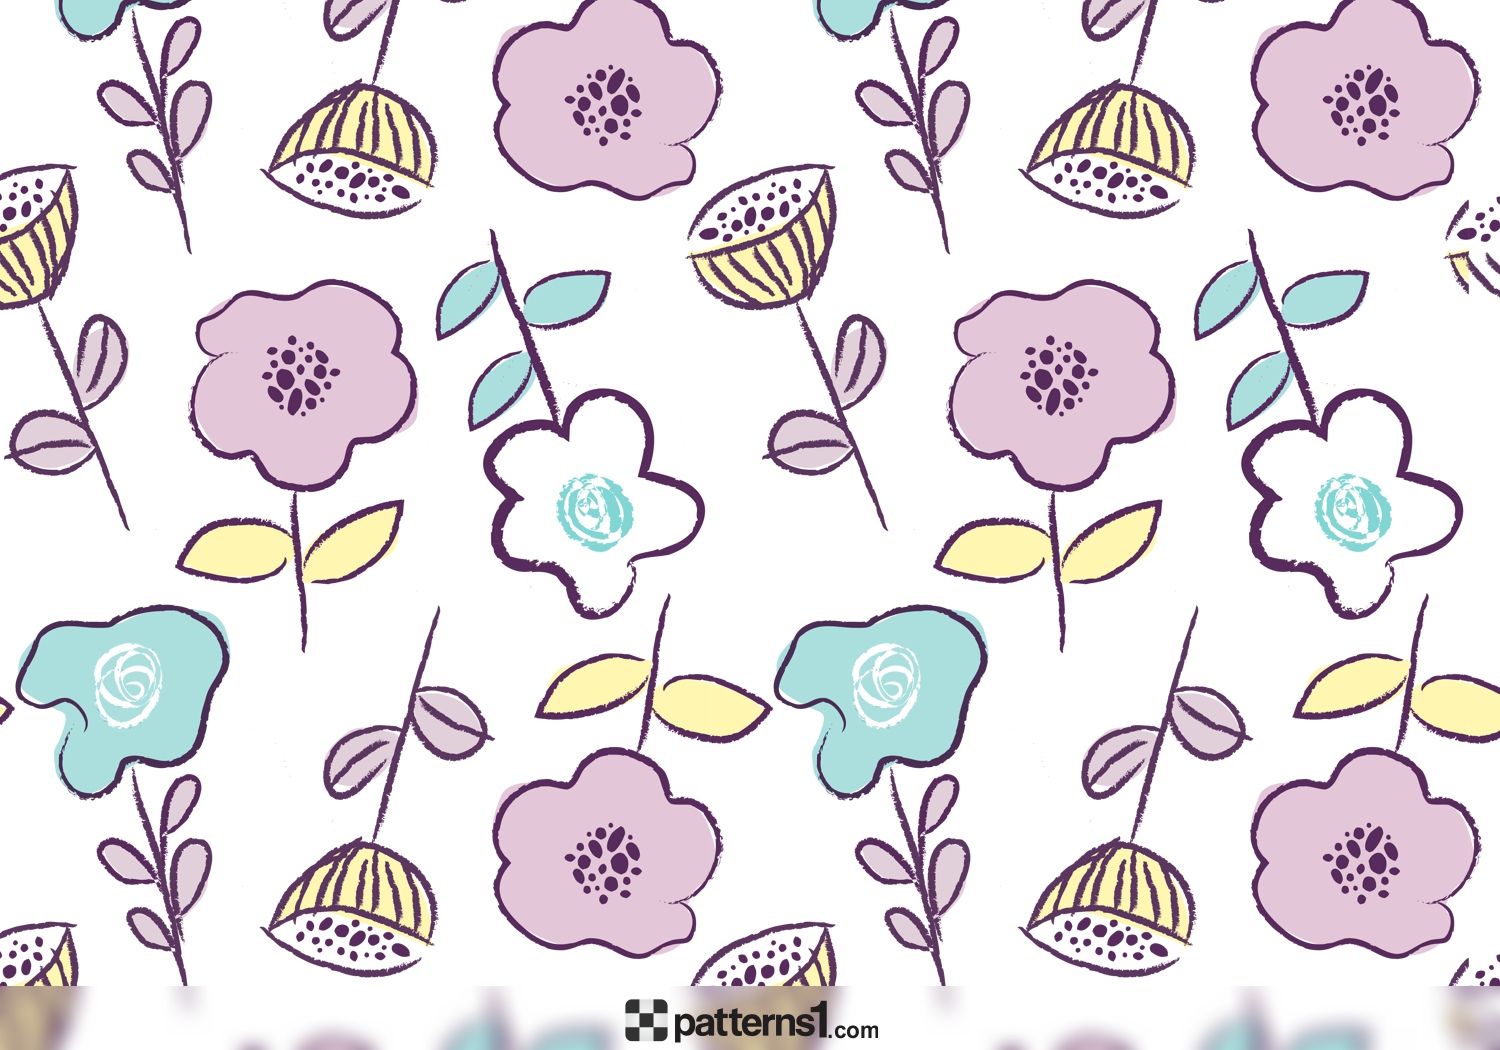 Spring flowers background clipart 